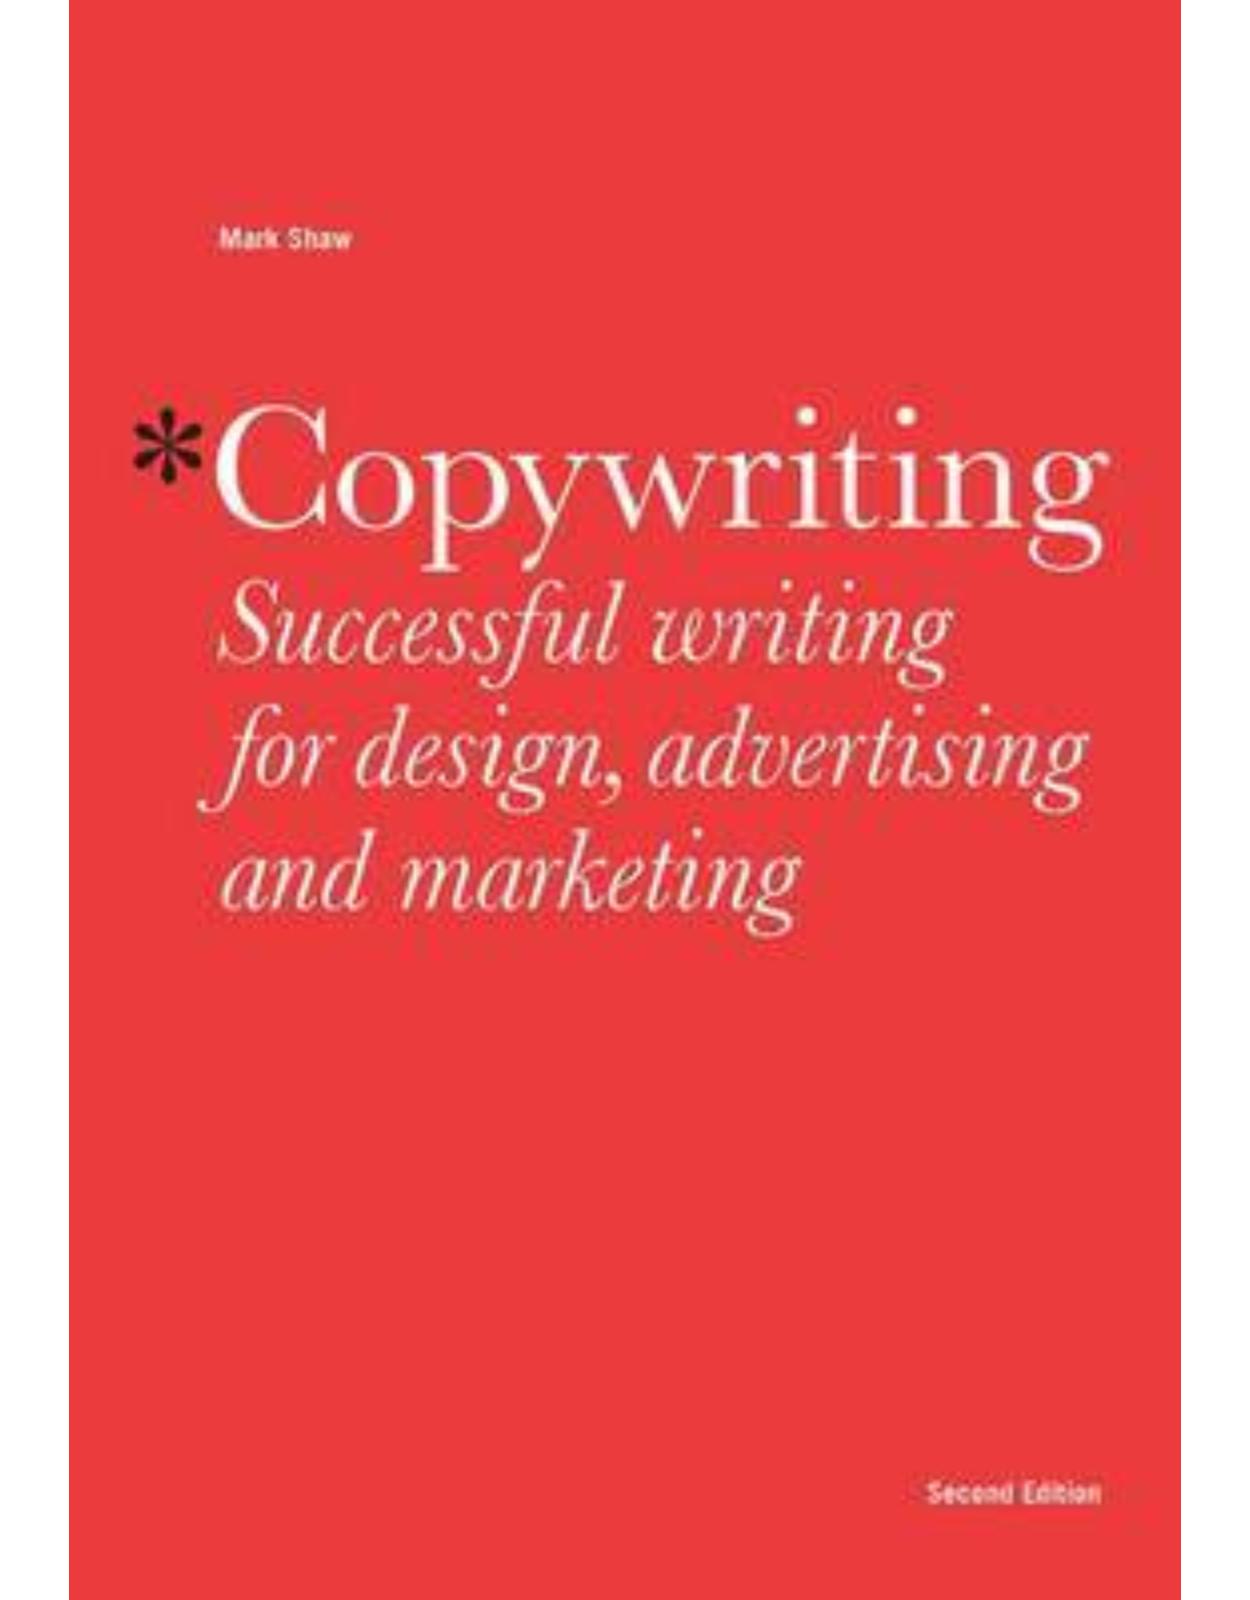 Copywriting: Successful Writing for Design, Advertising and Marketing, 2nd edition